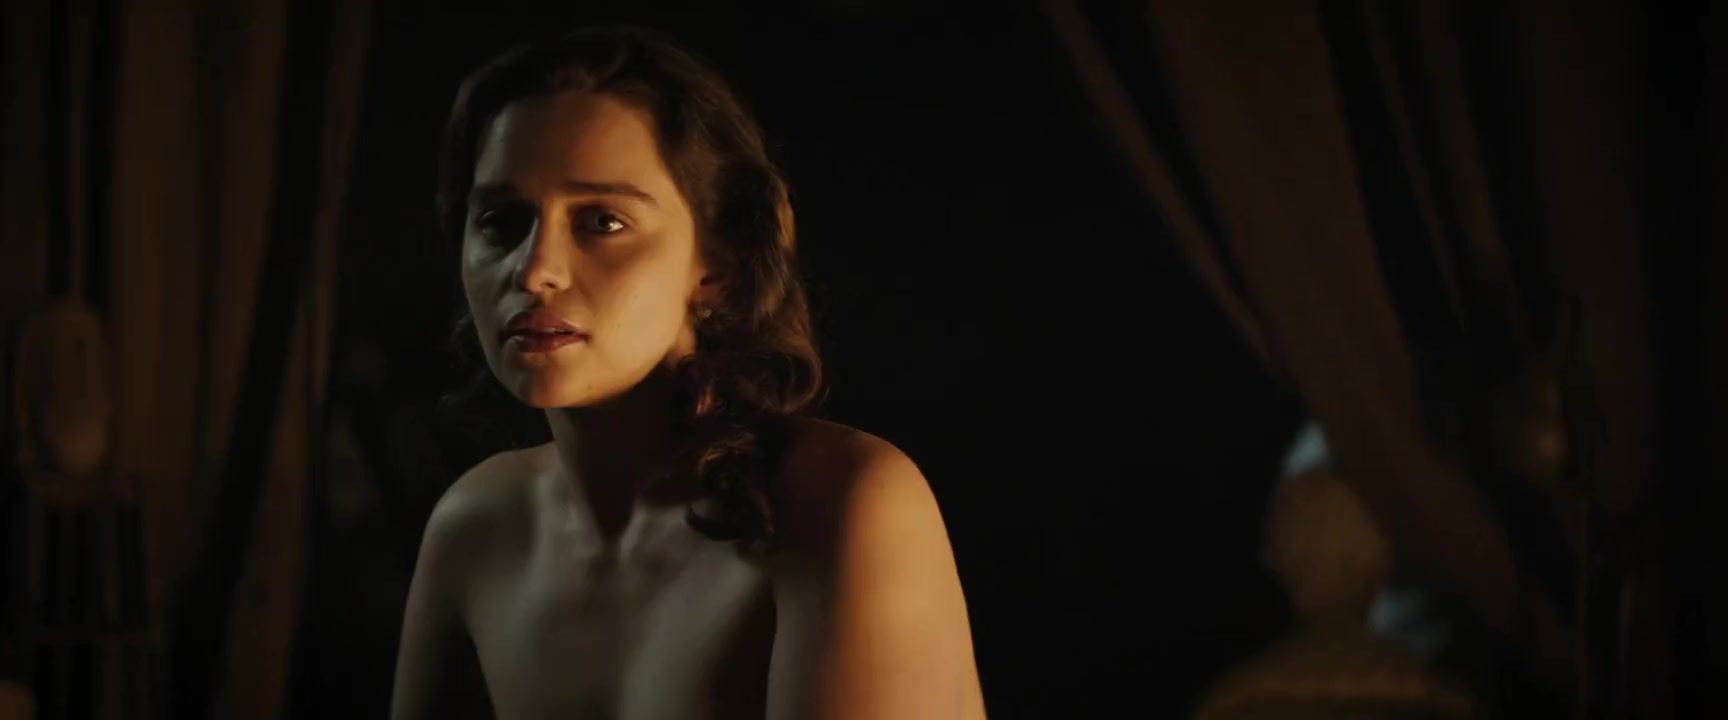 Facial Sexy video Emilia Clarke Fucked & Posing Nude in Voice from the Stone (2017) Closeups